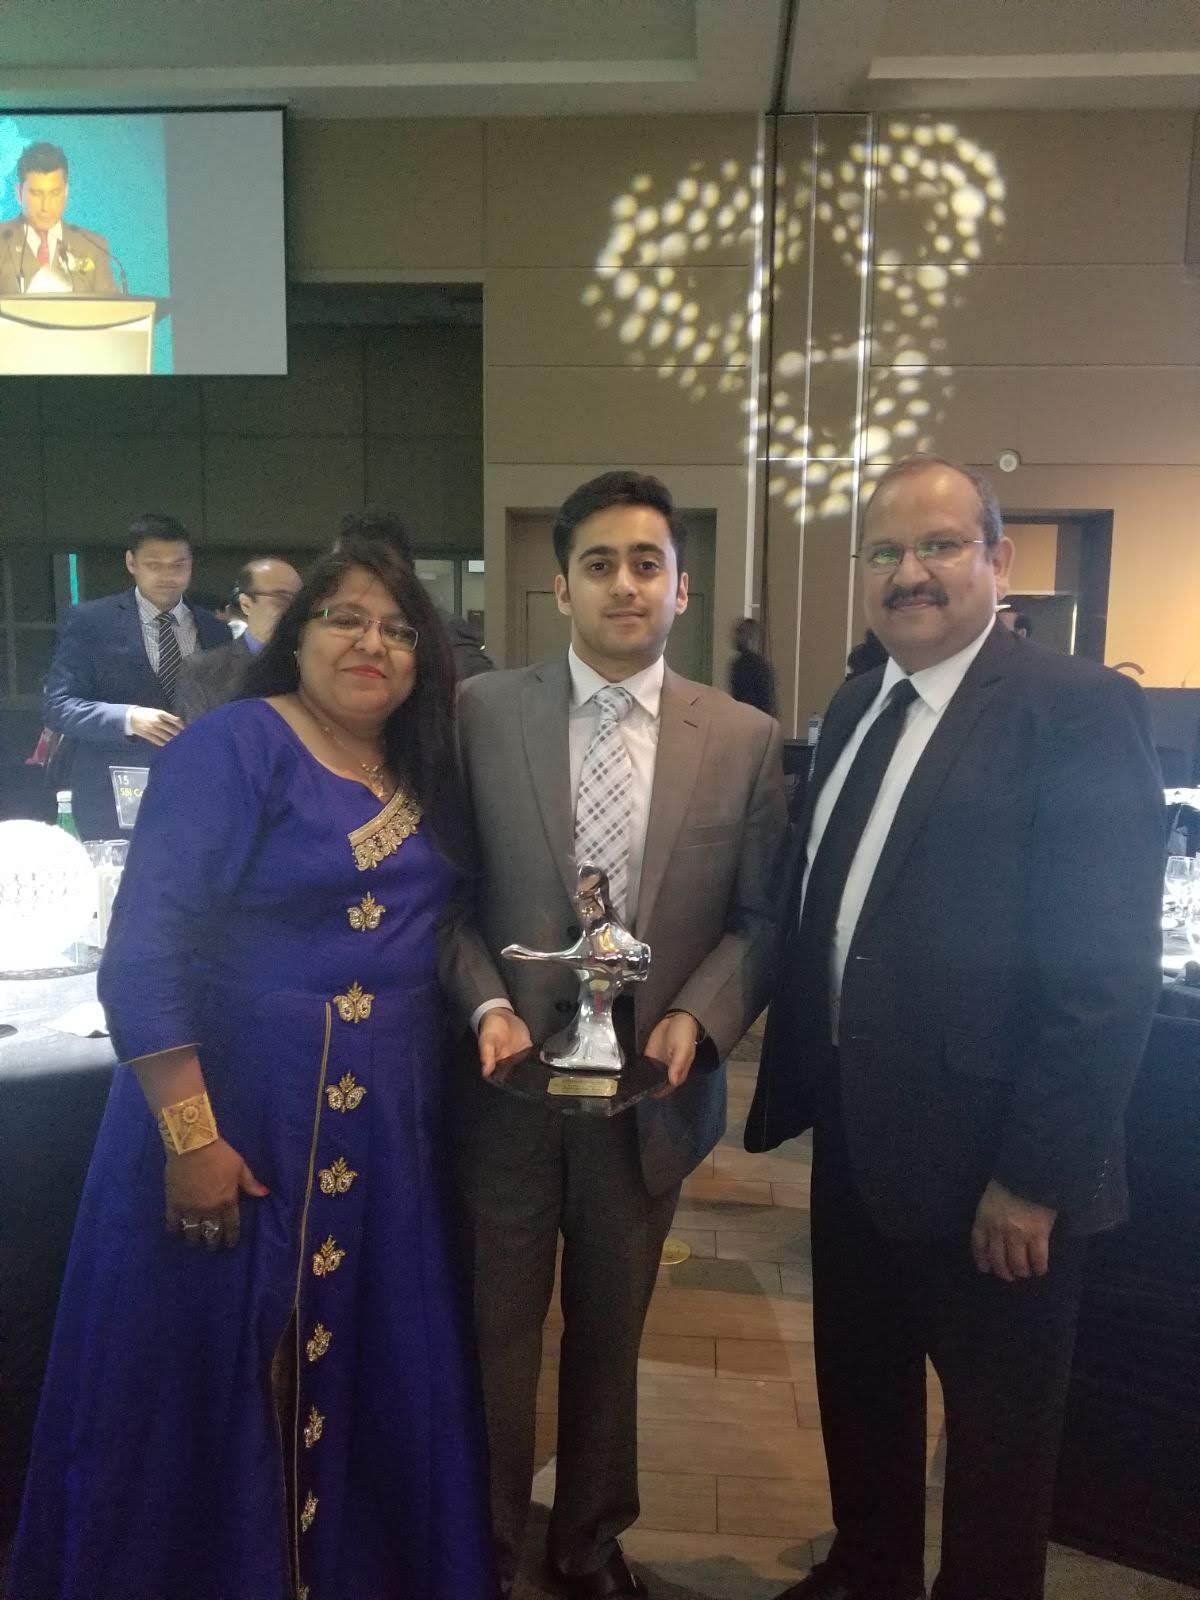 Abhishek Jain with his mother and SBI Canada Bank CEO Rajesh Gupta from whom he received the ICCC award.